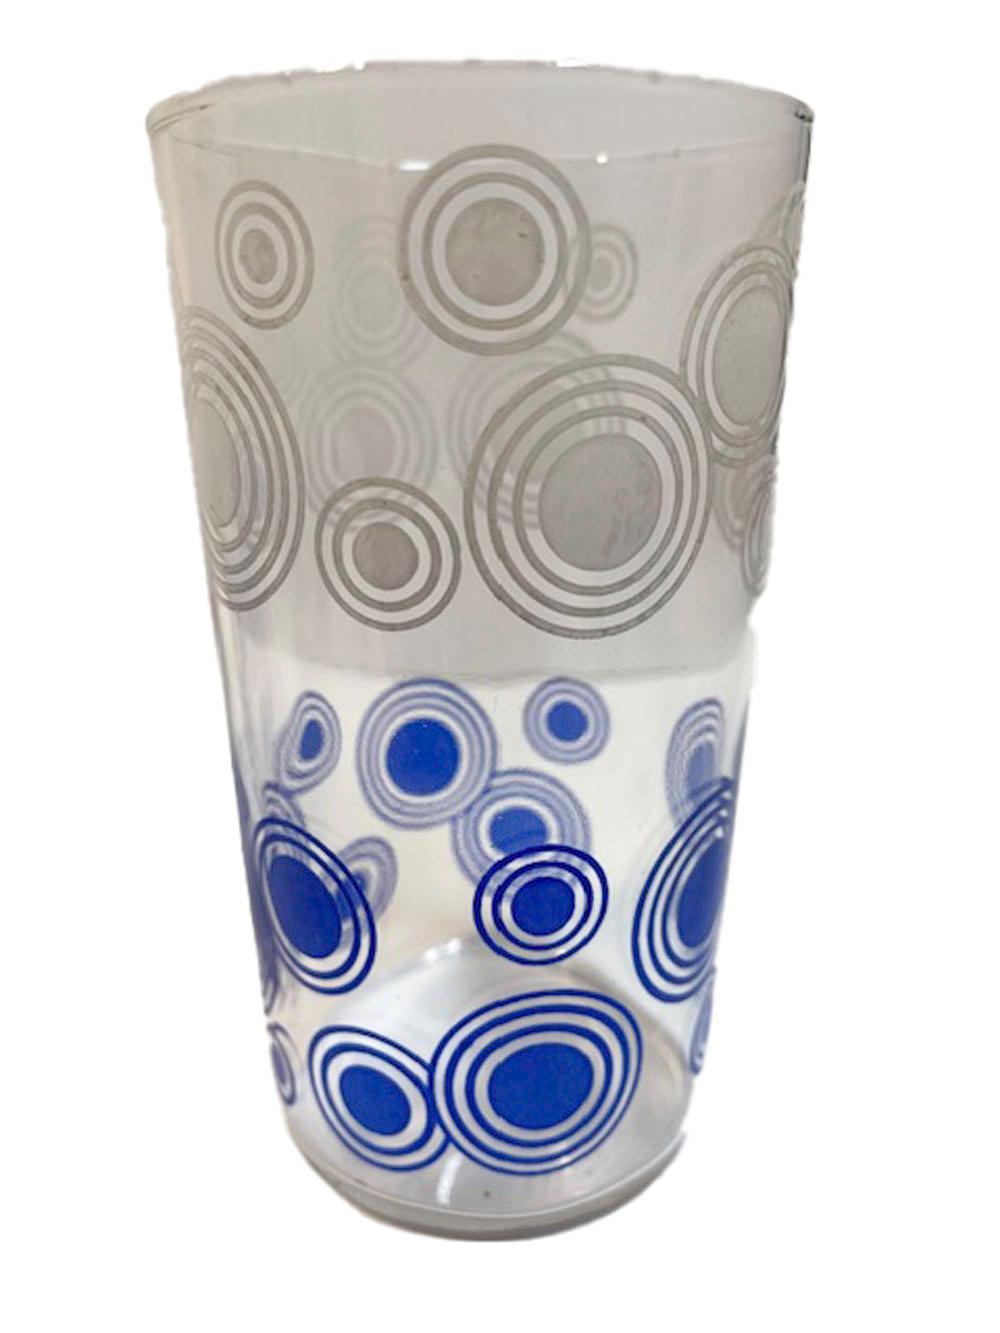 Set of 8 Libbey cocktail glasses decorated with dots enclosed in concentric circles, the top half of the glasses in white above blue on the lower half.